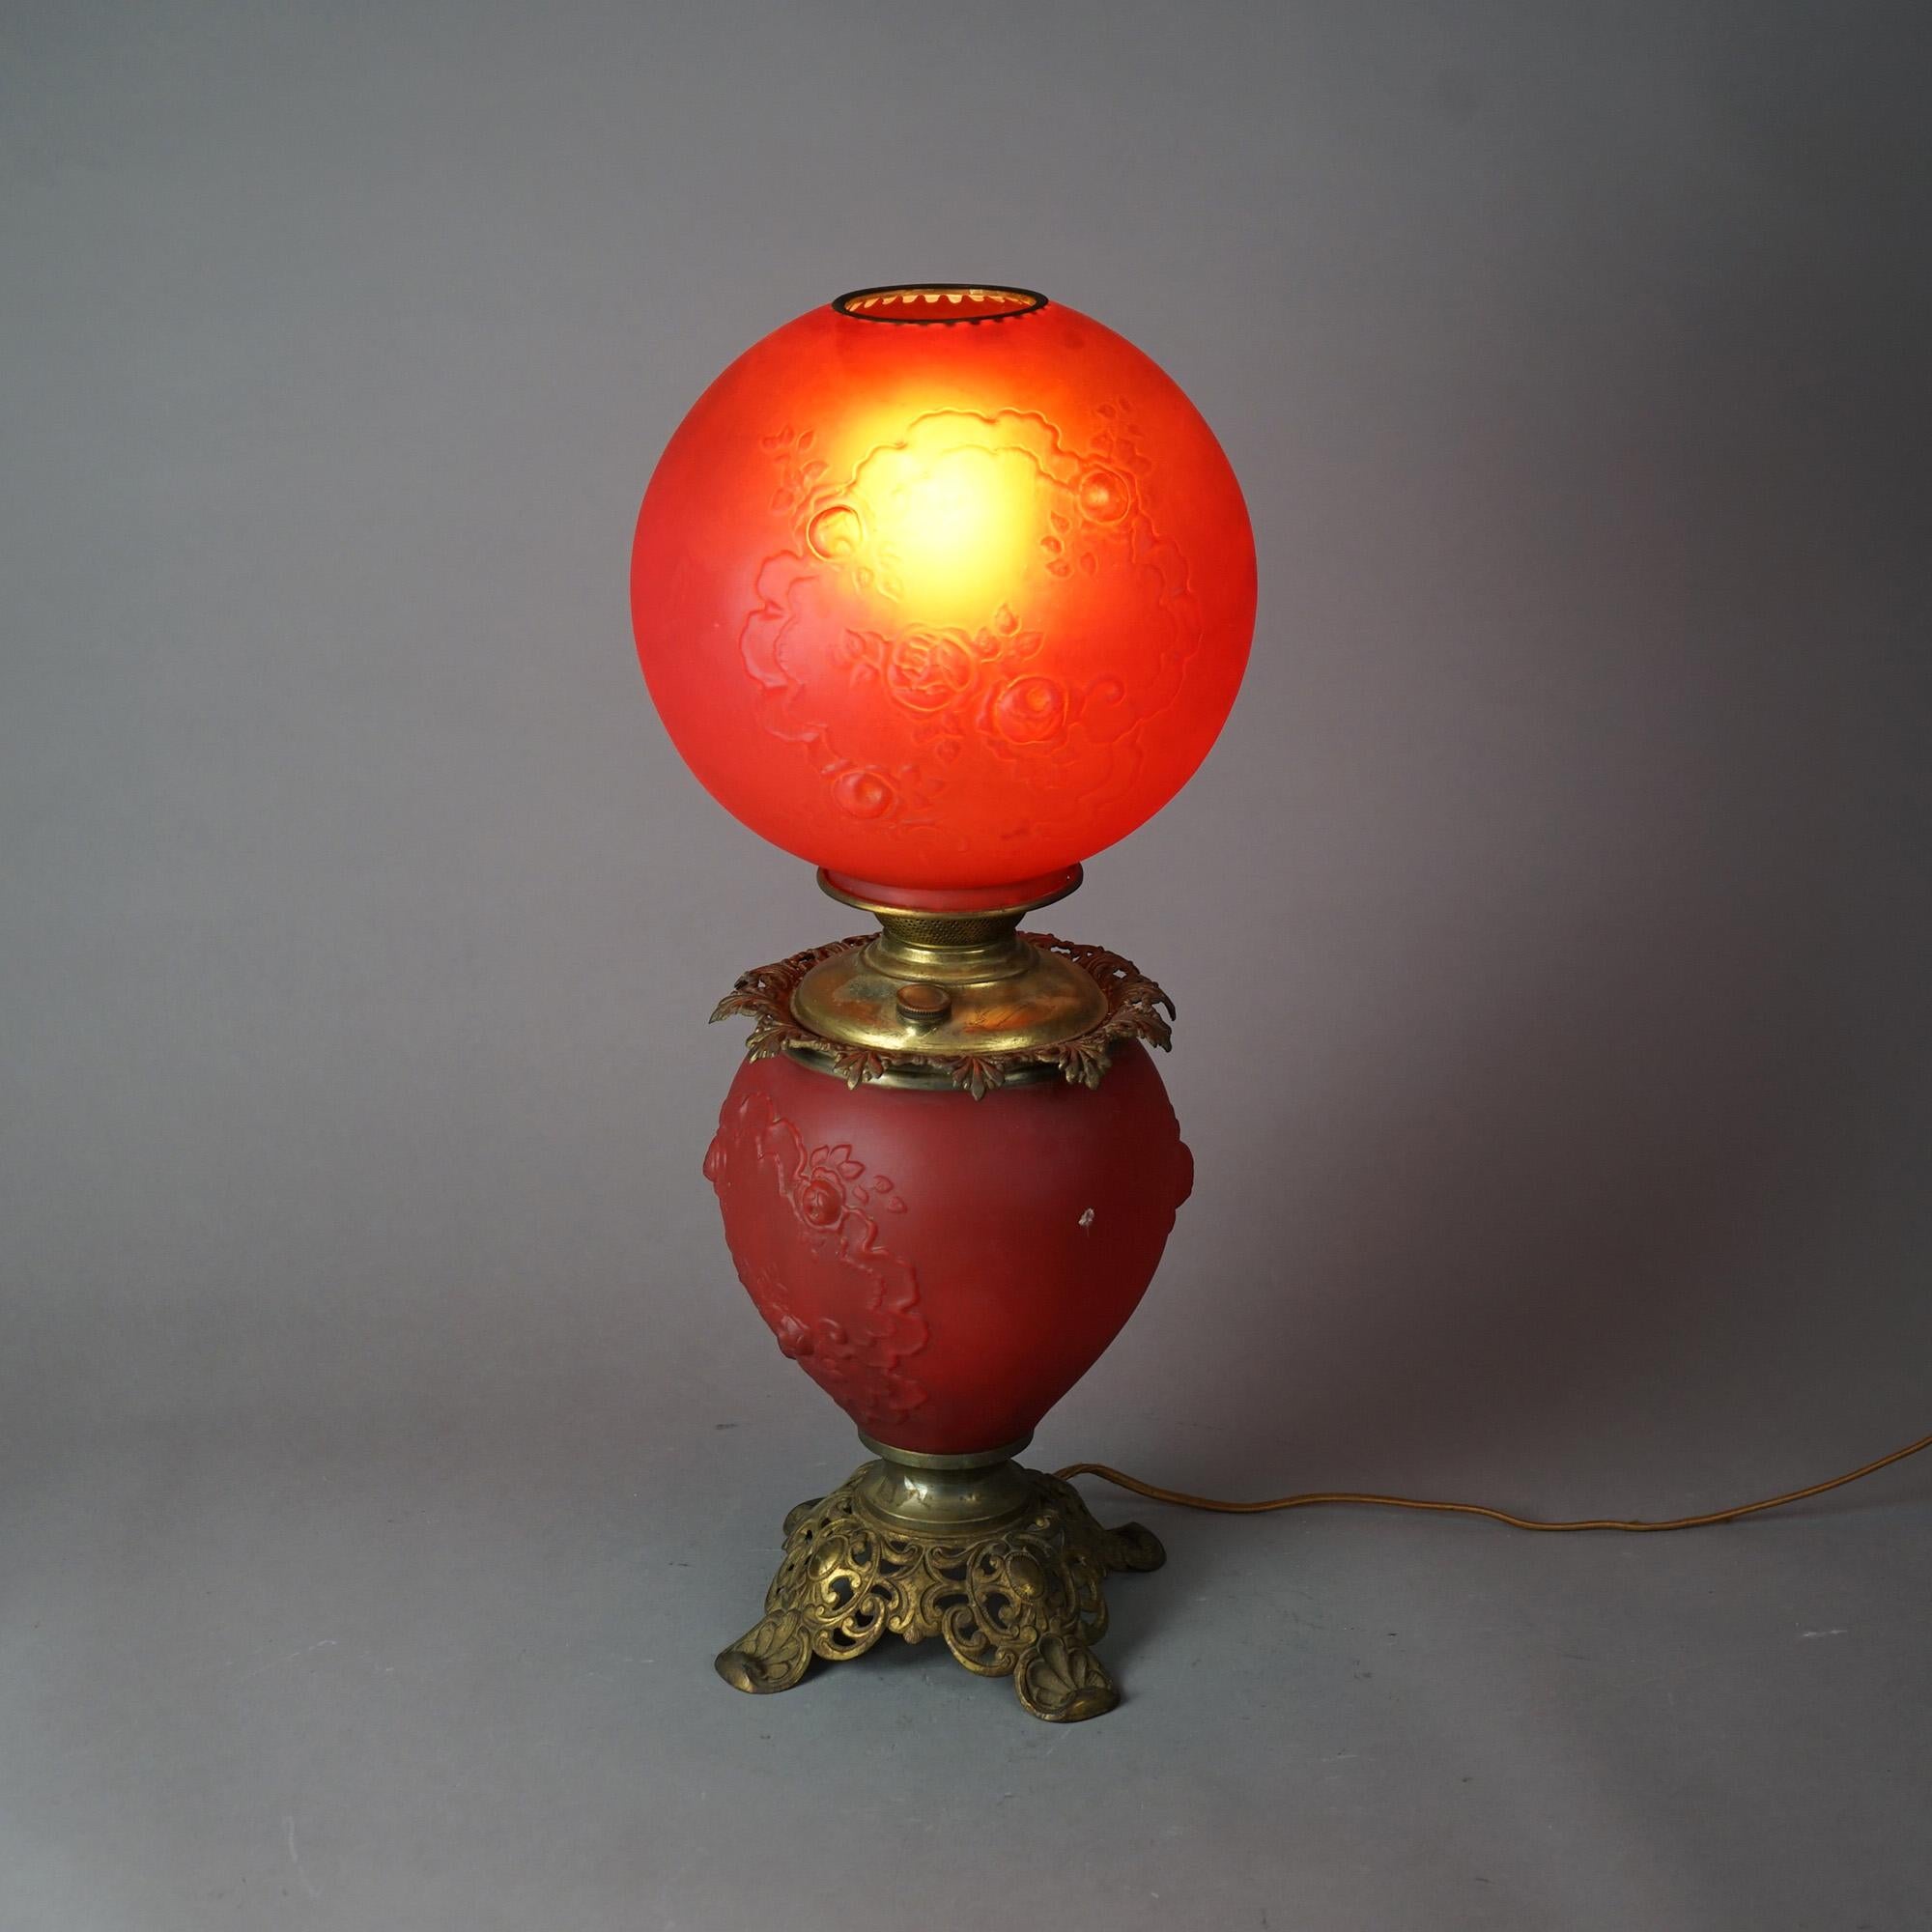 Antique Brass & Cranberry Glass Gone With The Wind Floral Embossed Lamp c1890 For Sale 5